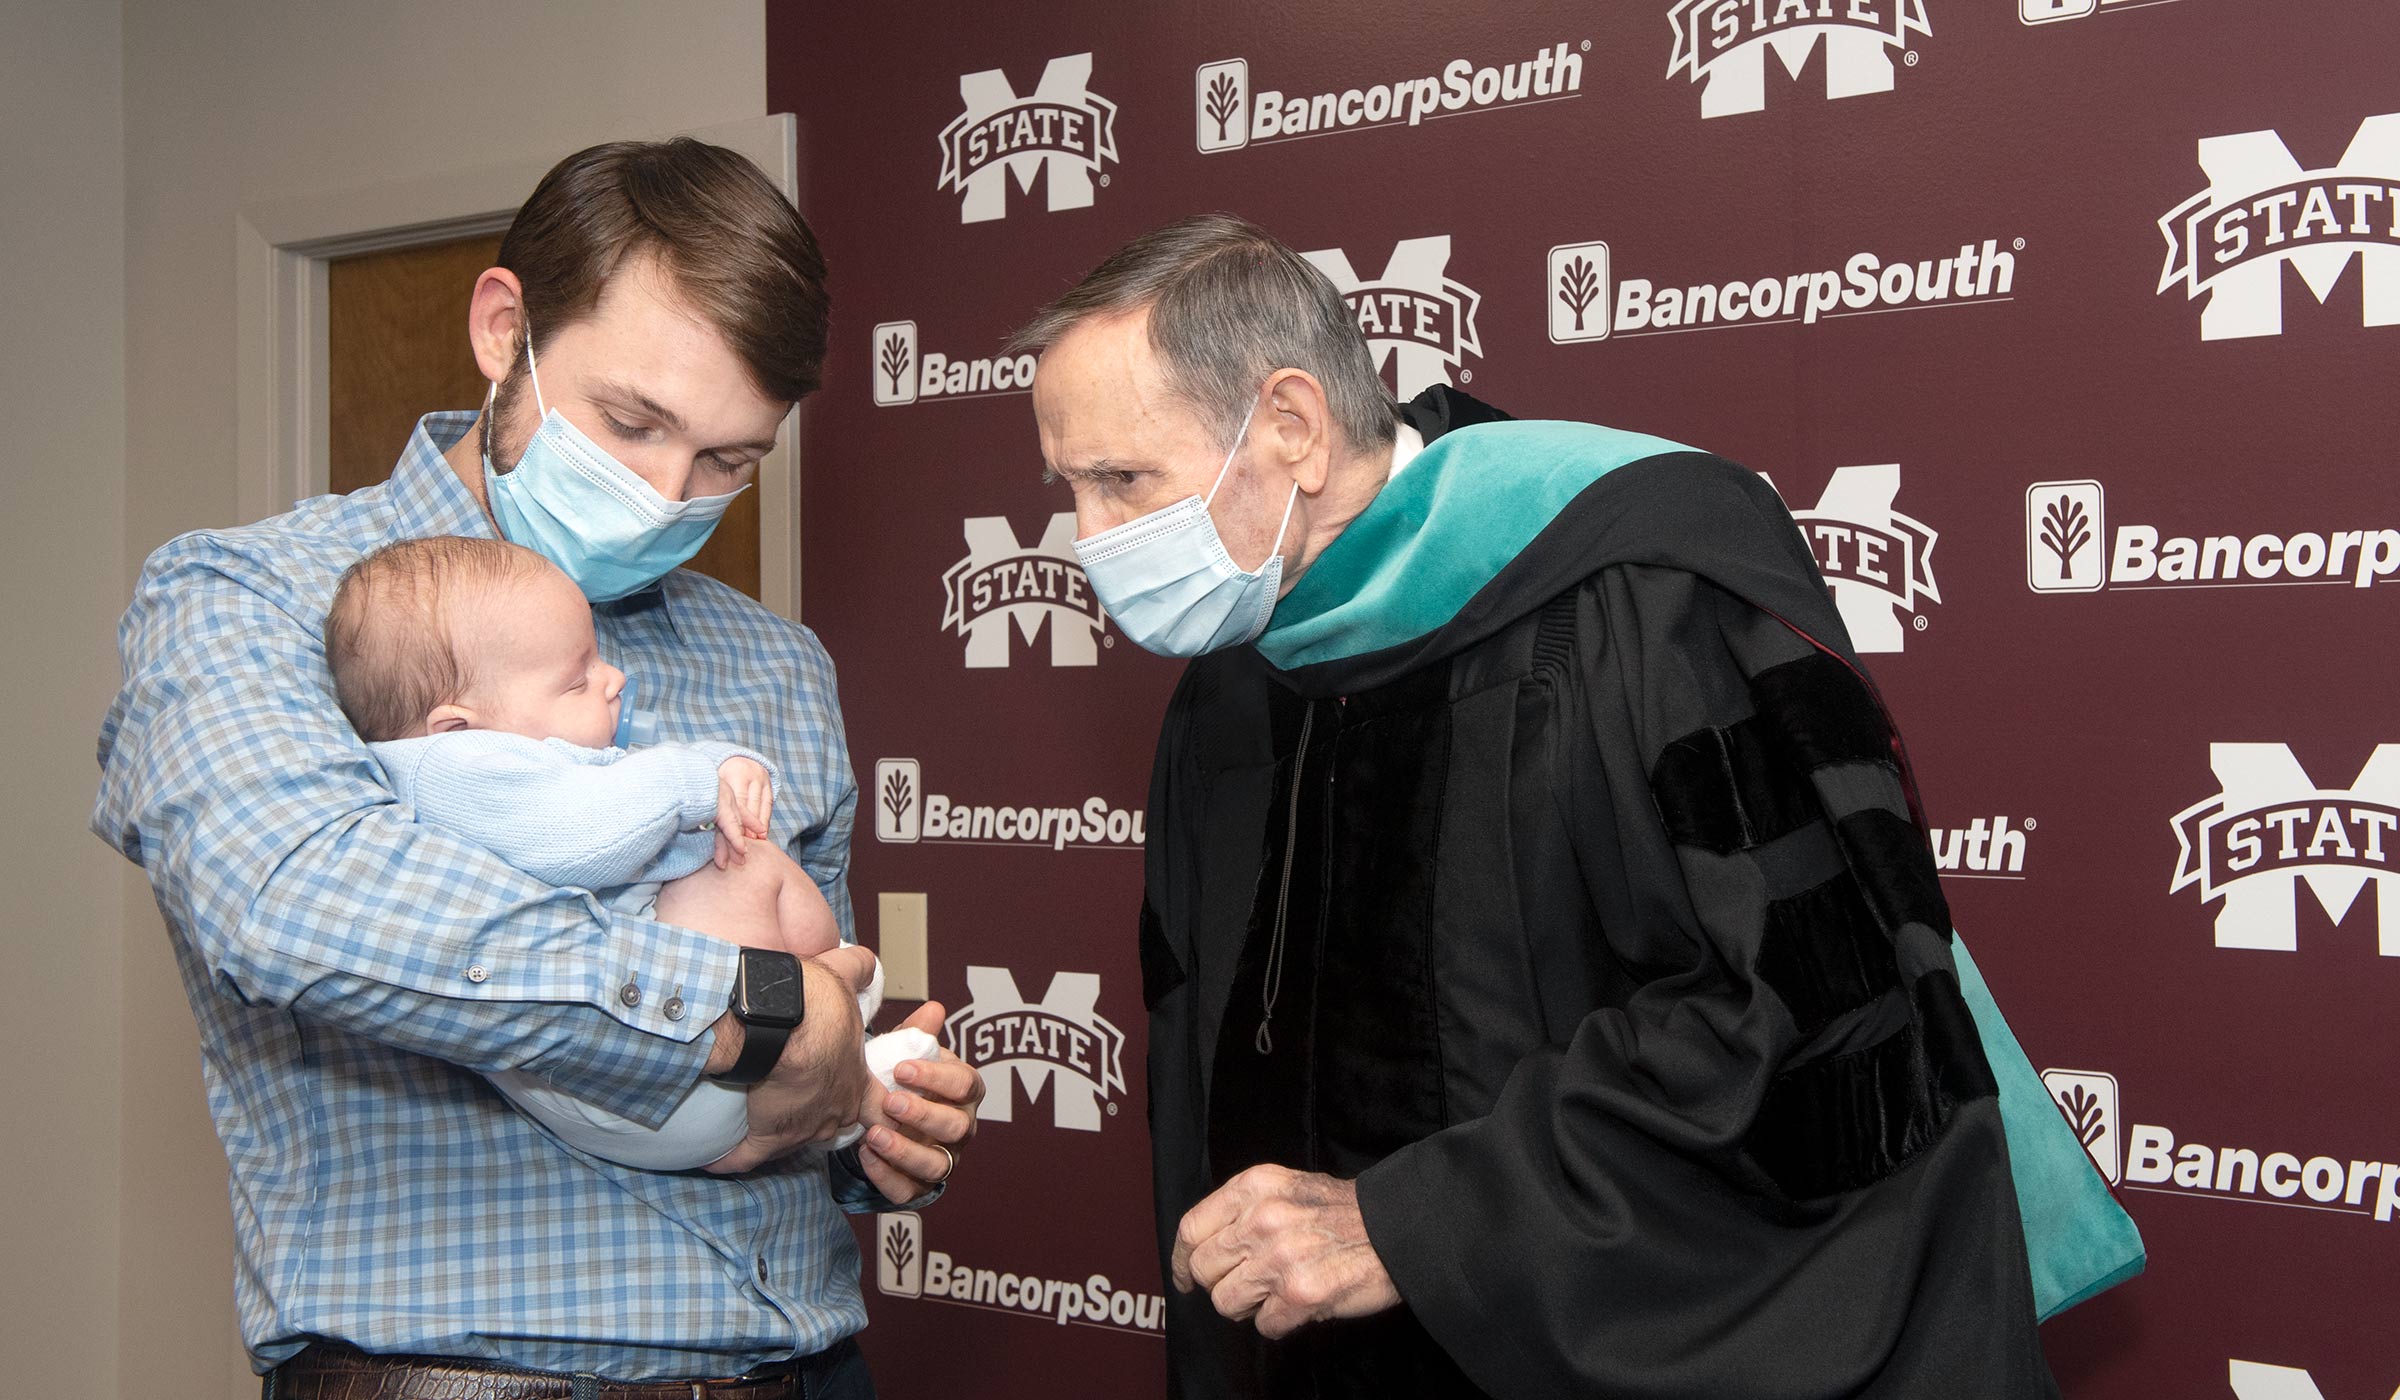 Man in mask and doctoral graduation gown looking at baby being held by man in checkered shirt.